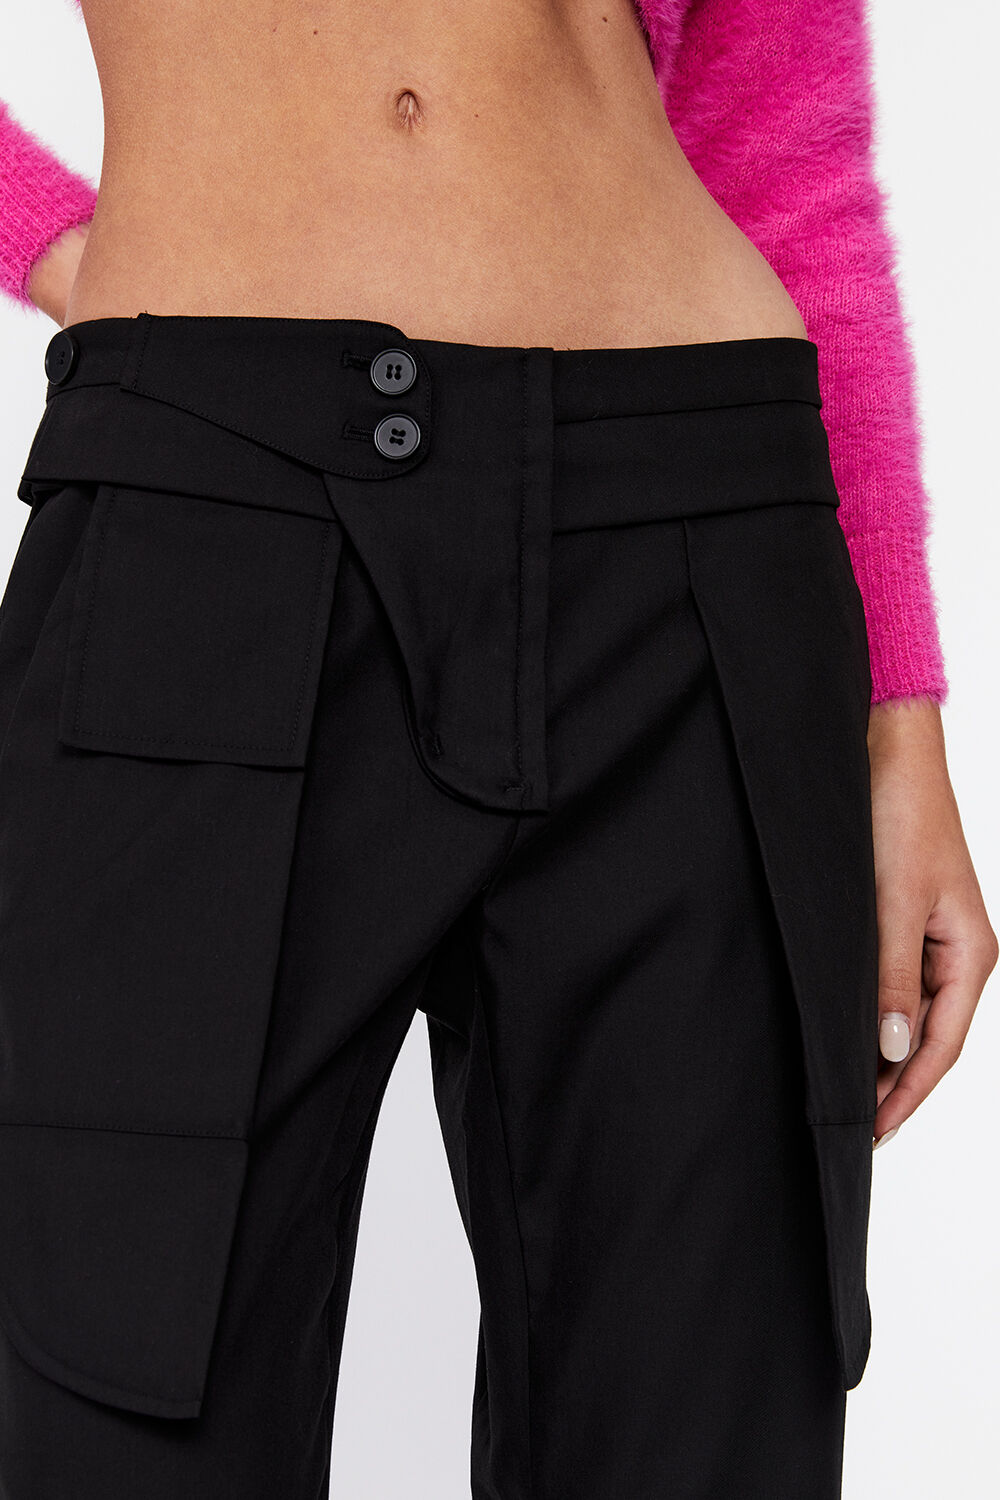 DECONSTRUCTED PANT in colour CAVIAR